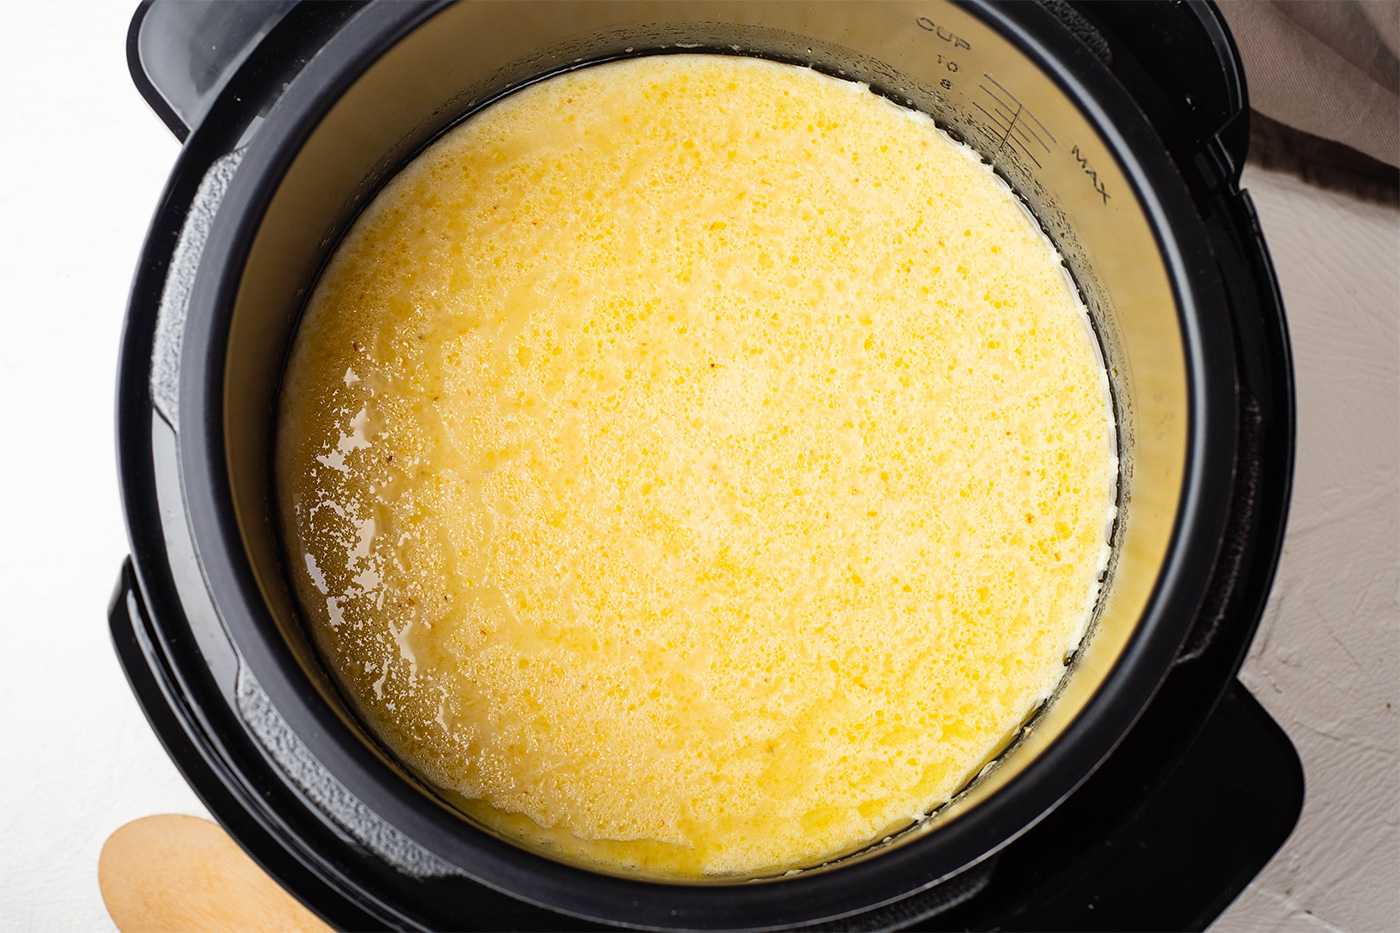 How To Make Grits In A Digital Electric Pressure Cooker